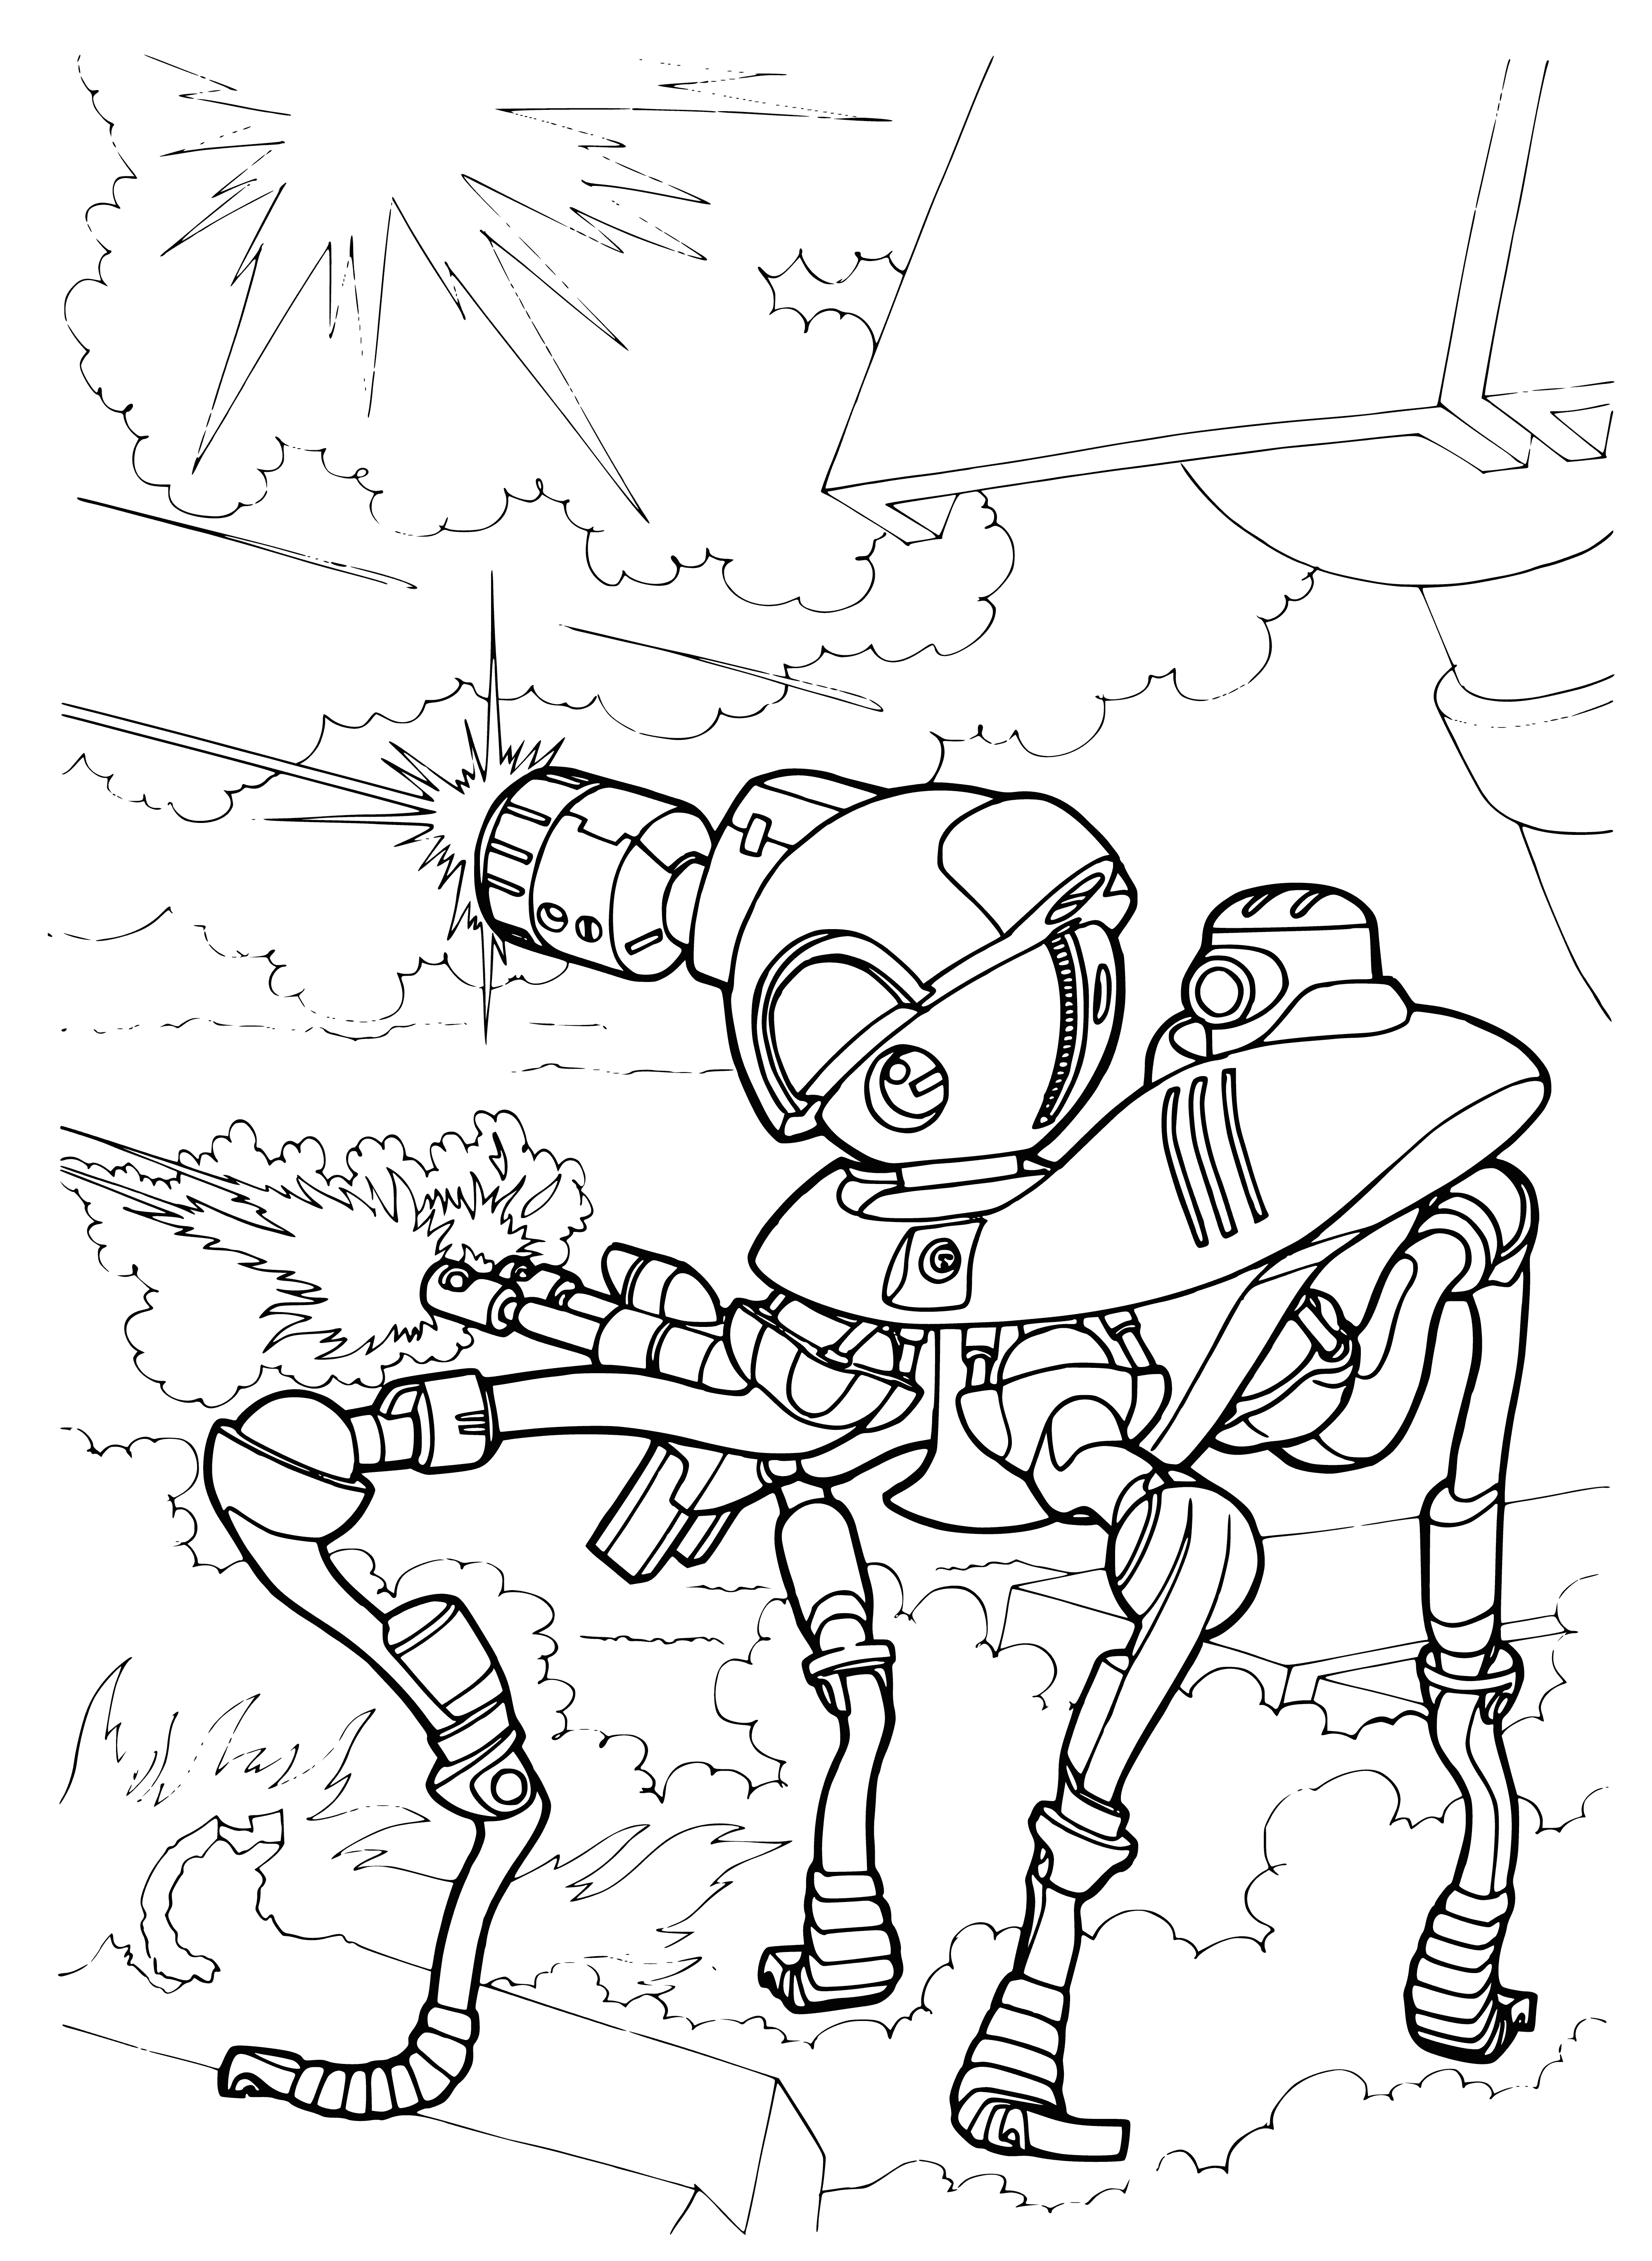 Four-fingered cyborg coloring page